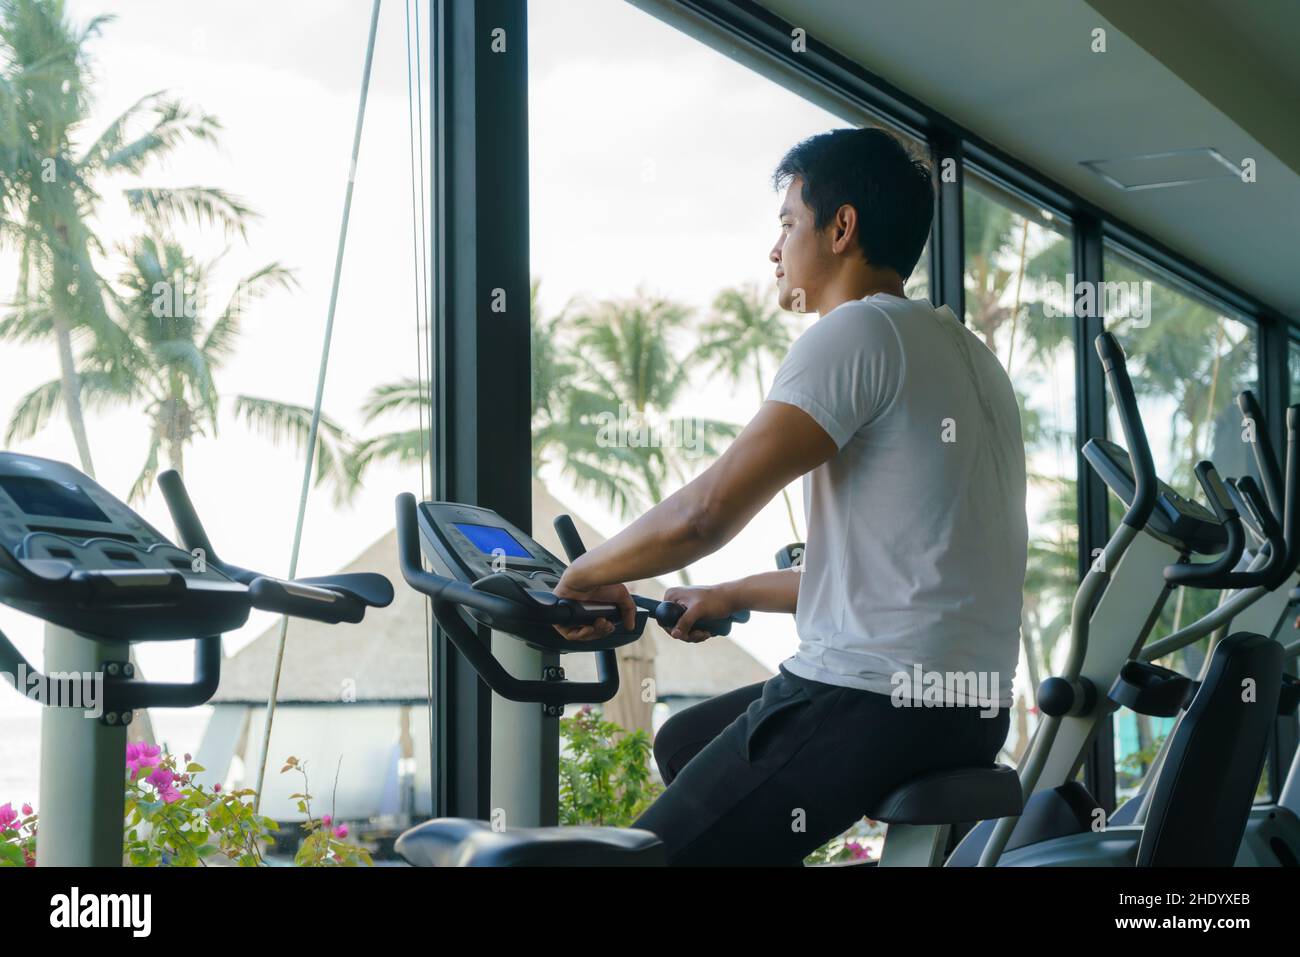 Asian man working out on indoor cycling at a resort fitness center in the morning. Stock Photo